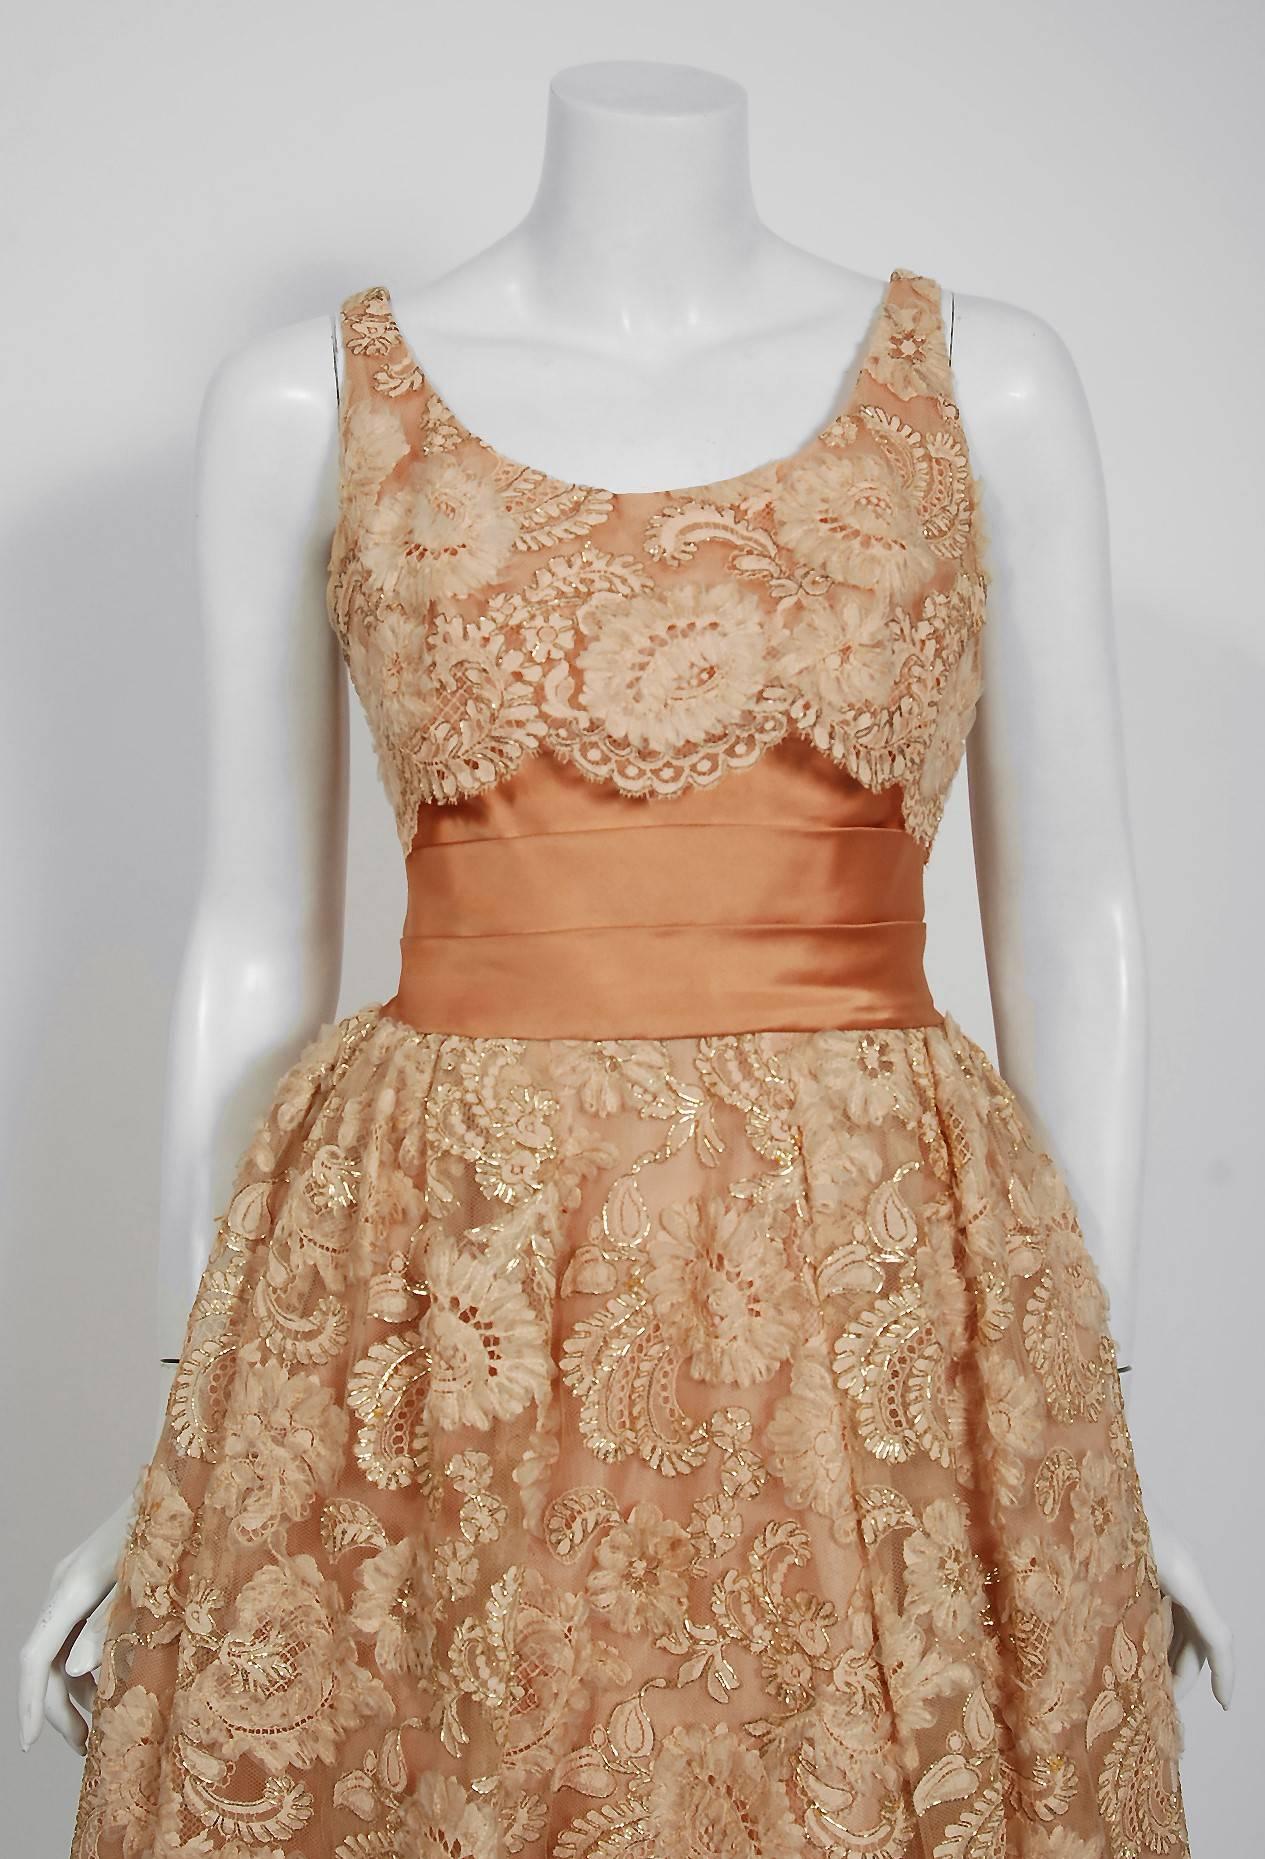 Breathtaking and incredibly chic Rudolf couture designer golden peach party dress dating back to the mid 1950's. The company, started by Max Cory Rudolf, was an upscale boutique in New York City that catered to very prestigious and wealthy